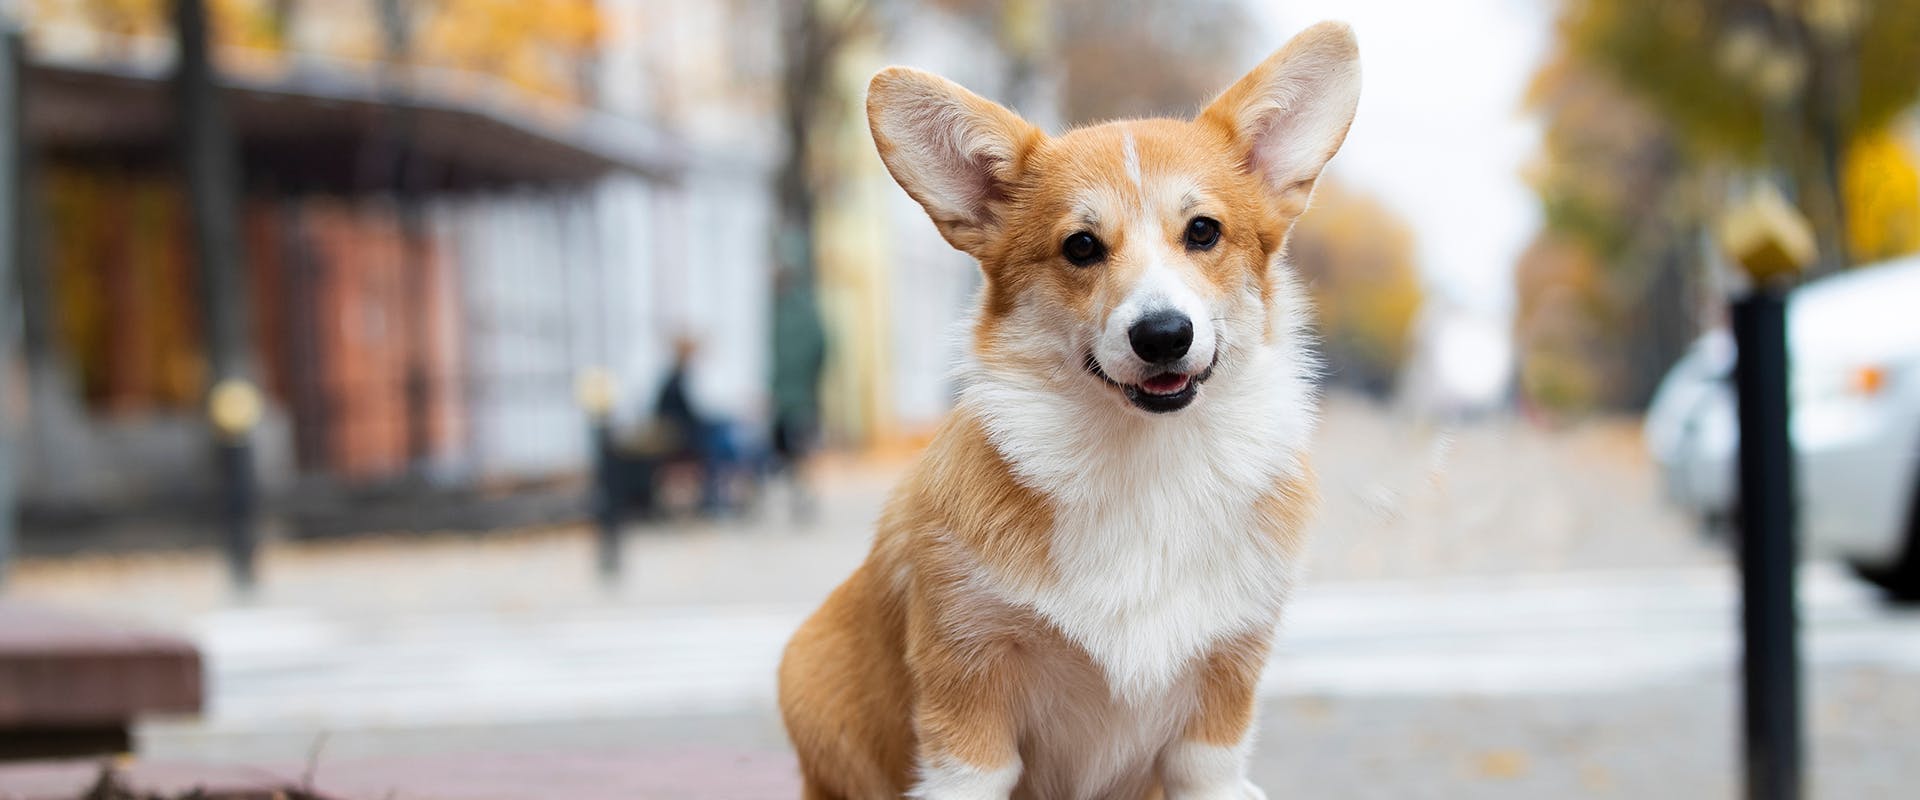 A Pembroke Welsh Corgi standing in the middle of a street